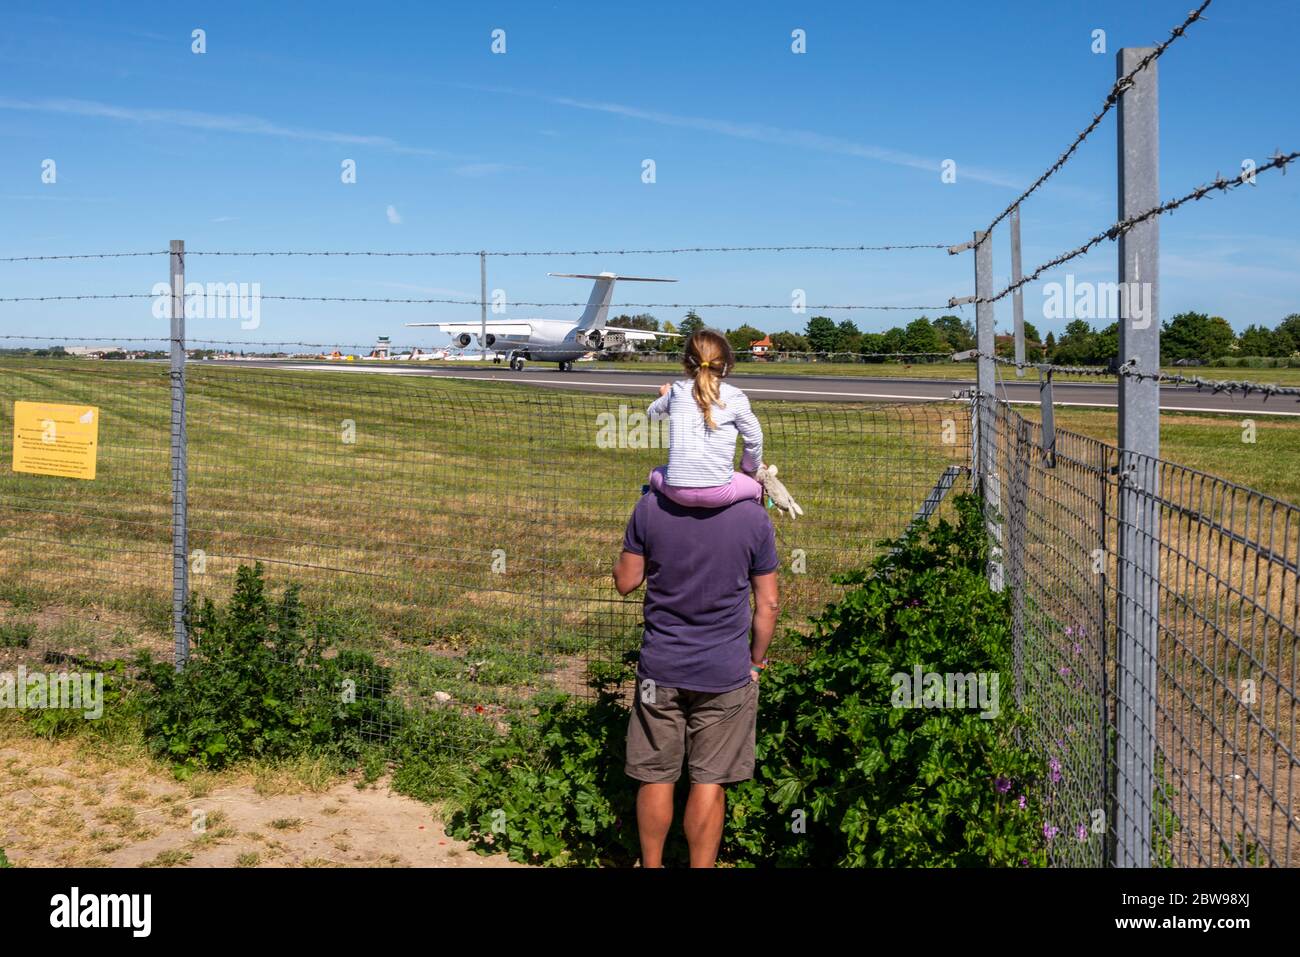 Father and daughter watching a plane land at London Southend Airport, Essex, UK. Starting them young. Plane spotting at the airport fence Stock Photo